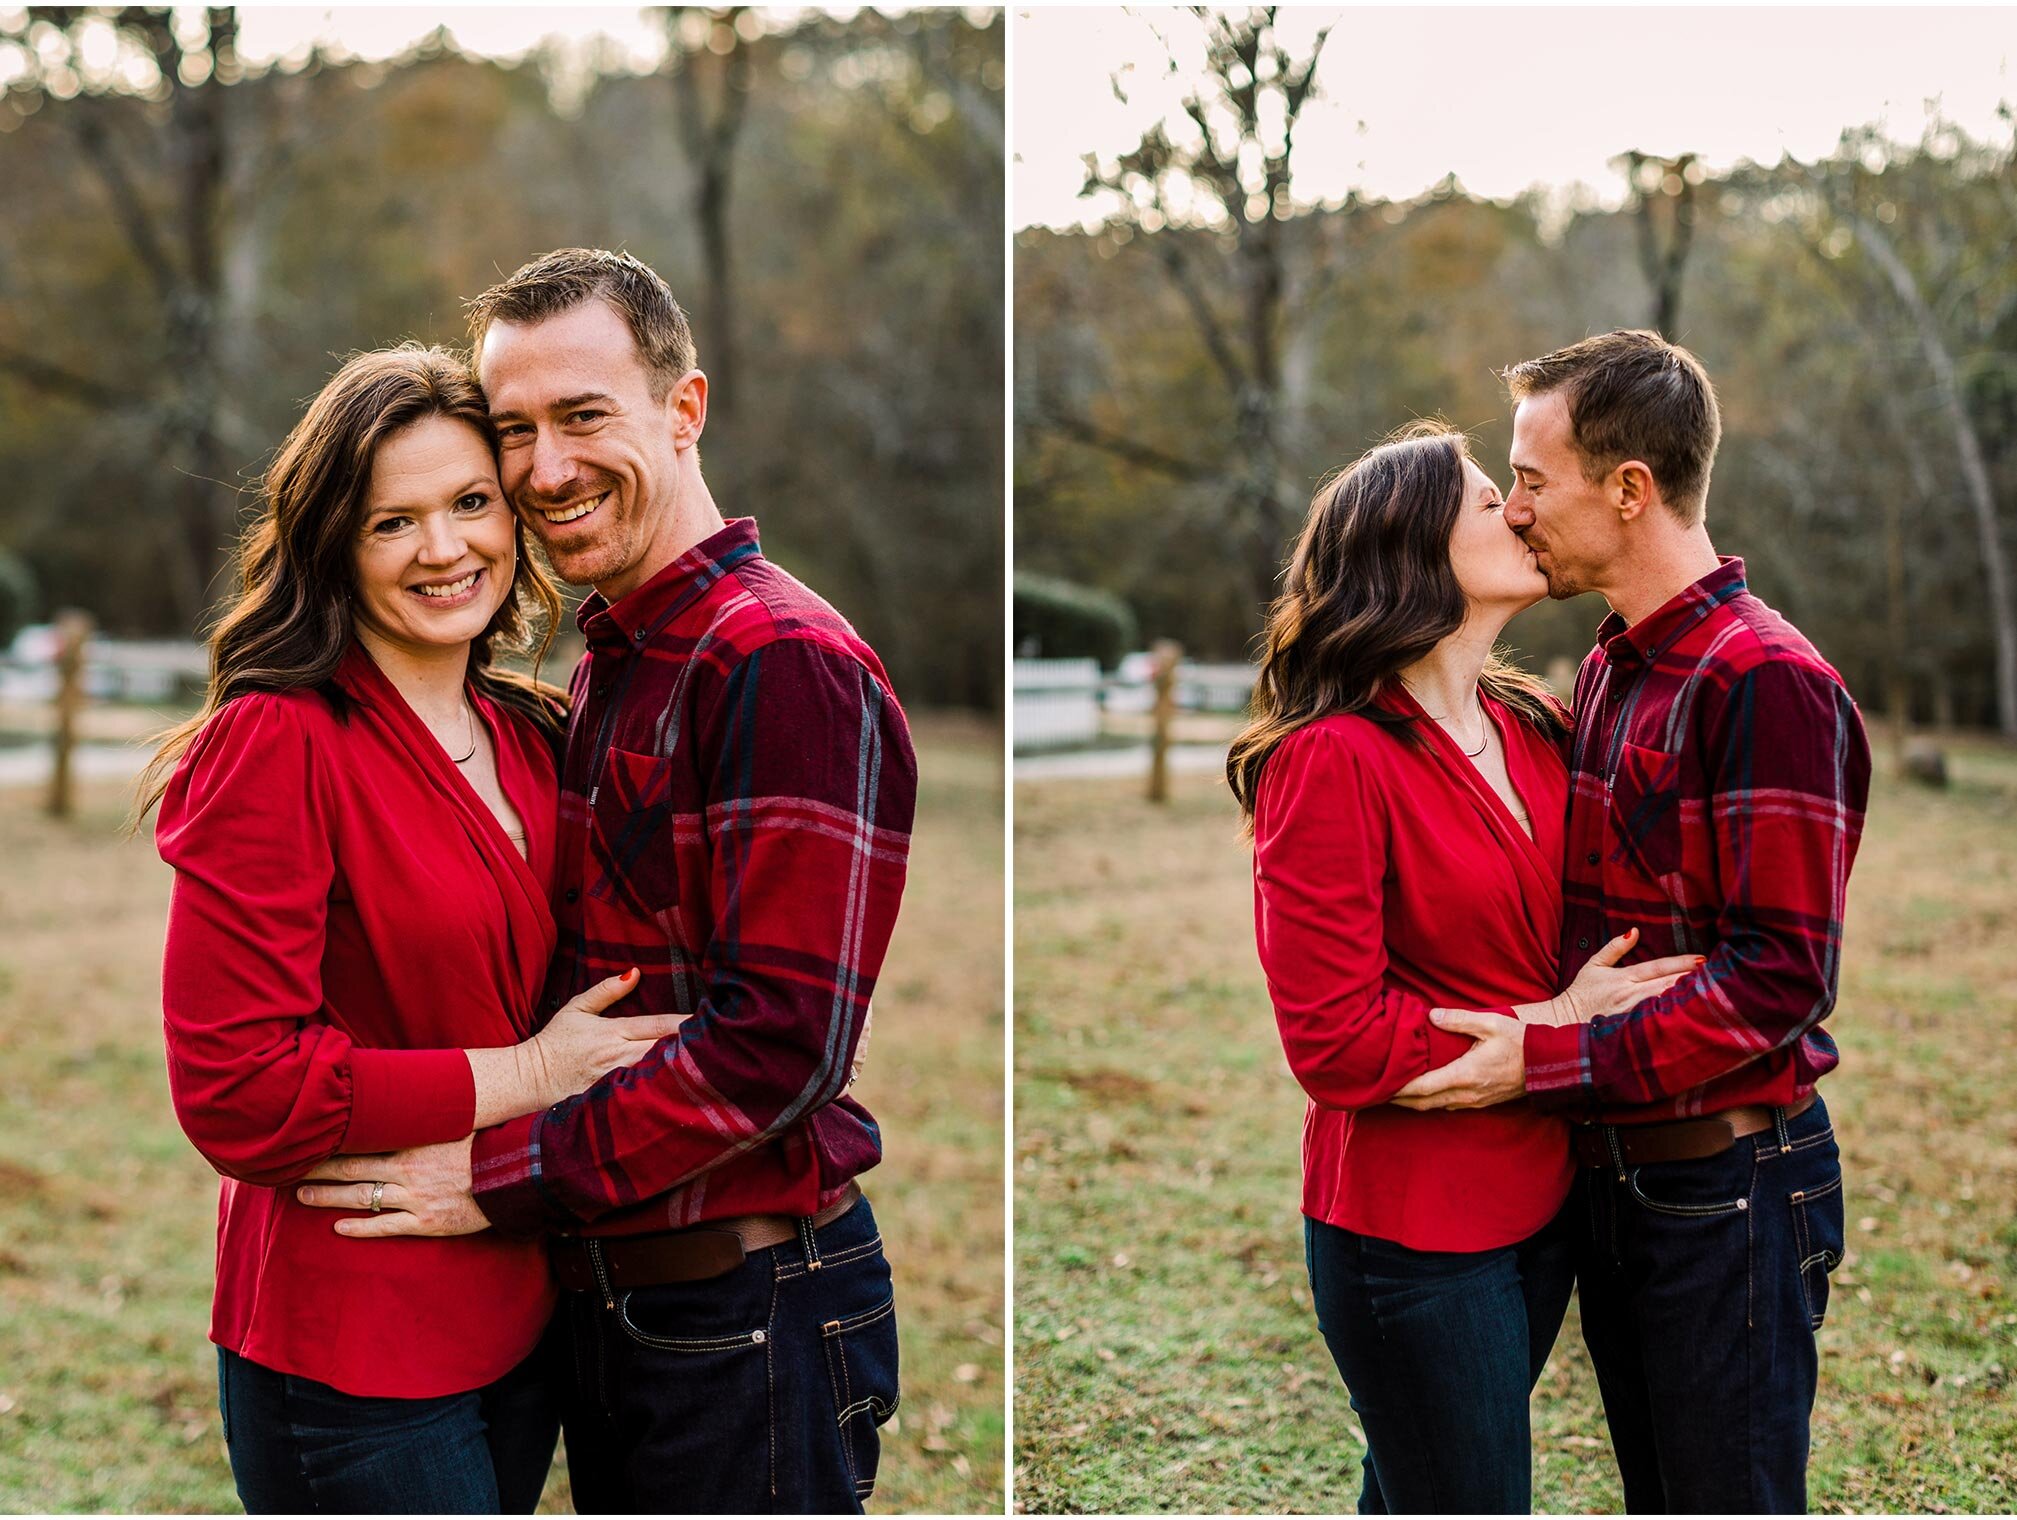 Durham Photographer | By G. Lin Photography | Couple wearing red and smiling outside | West Point on Eno River